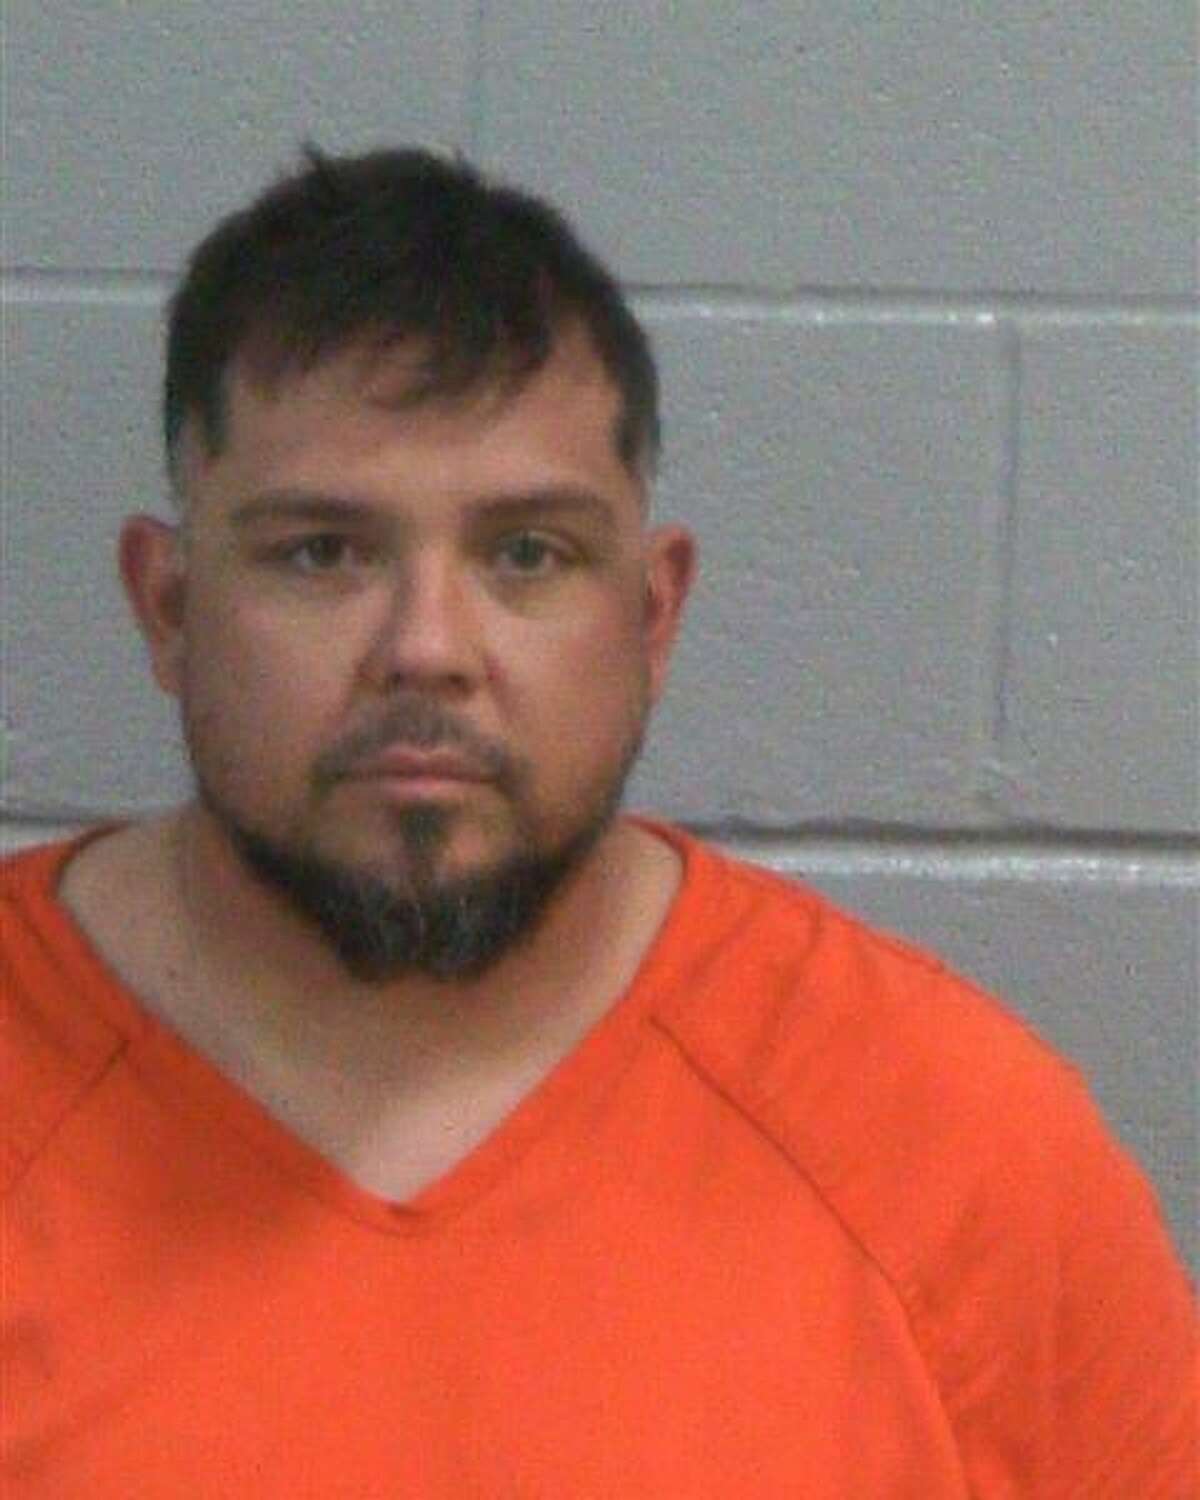 Herman E. Snellenberger, 37, is being charged with sexual assault, a second-degree felony charge.